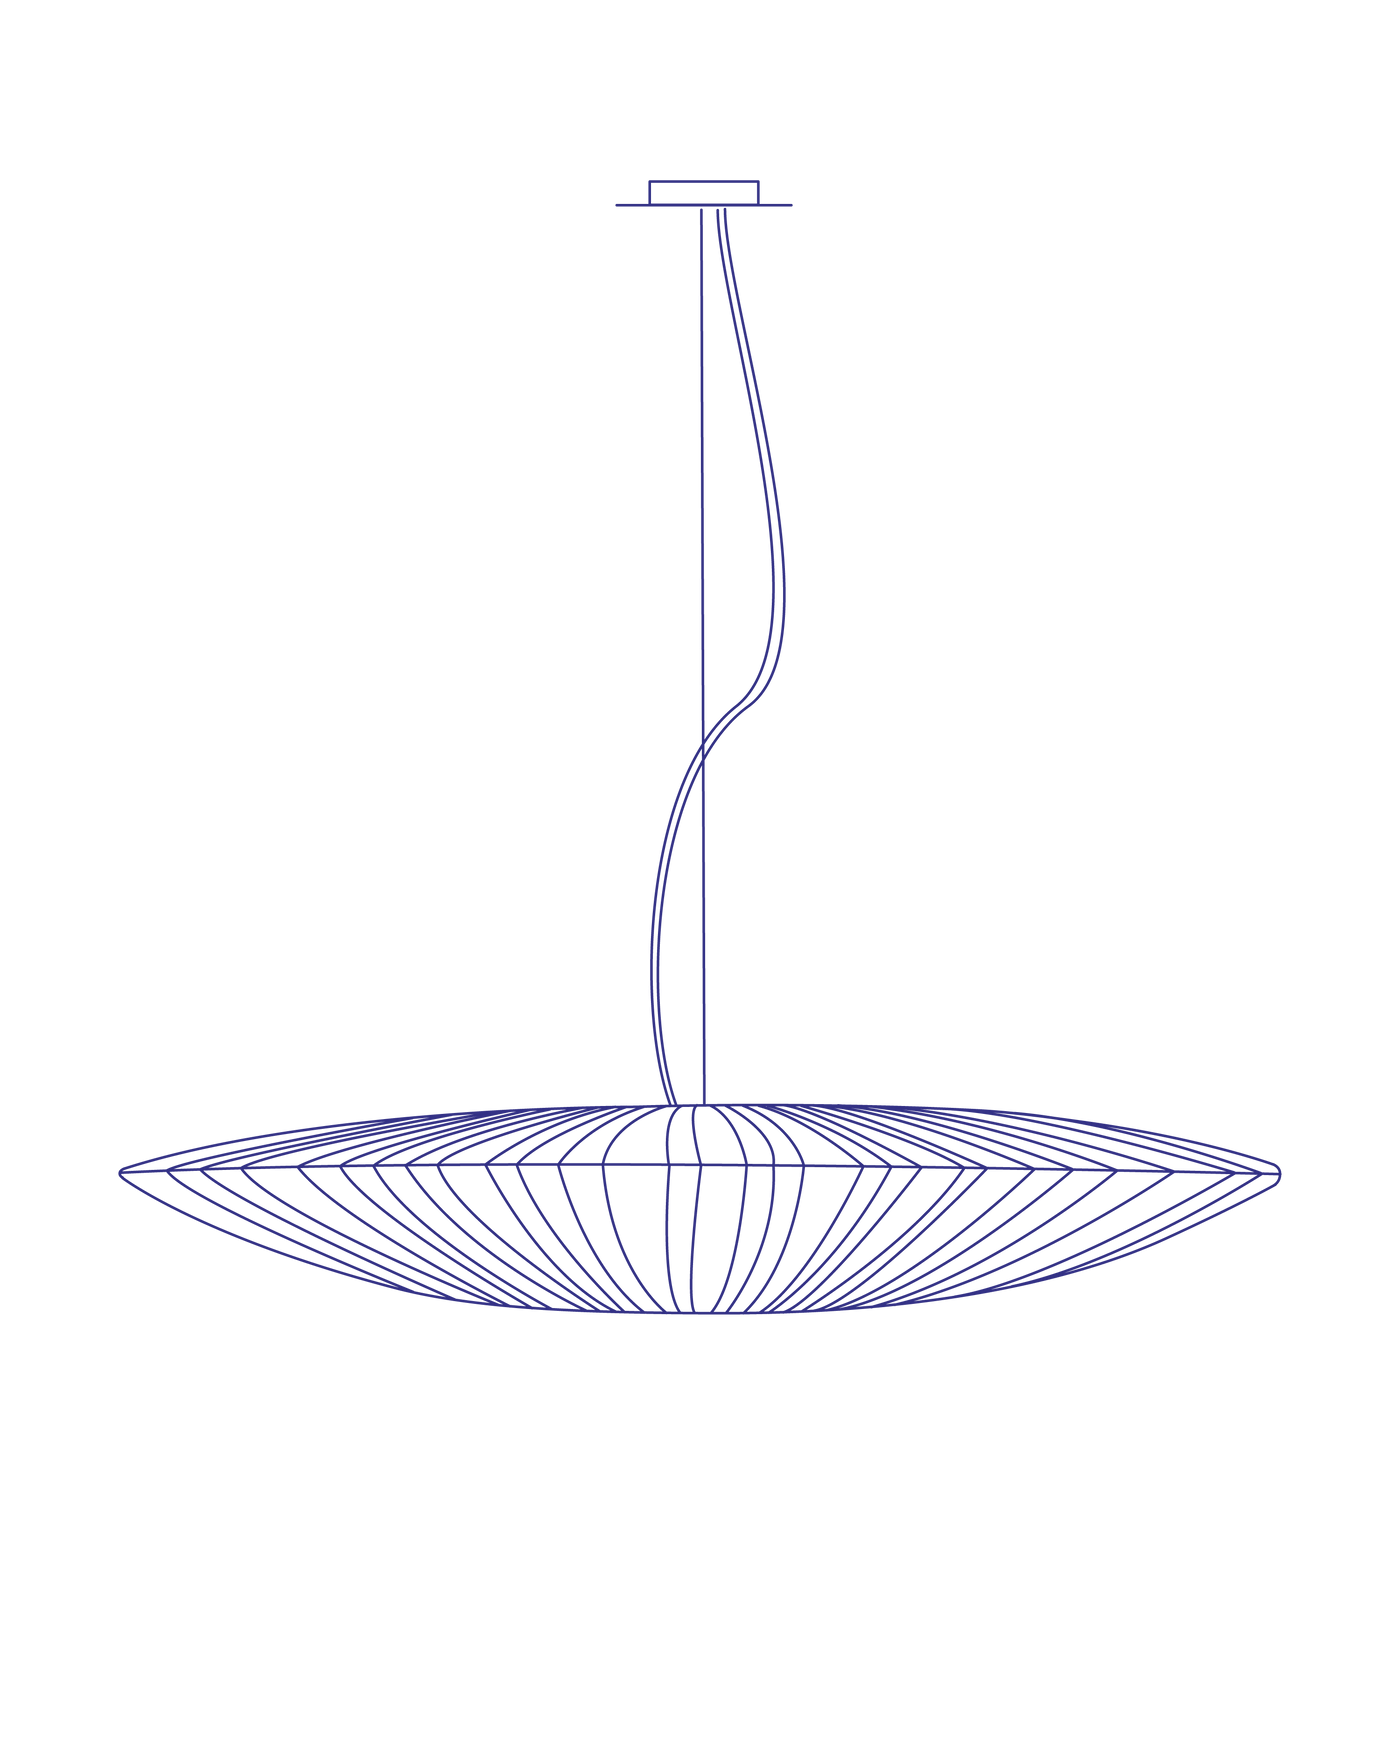 Stand By Pendant Light Large Sizes - size: 156cm 61in